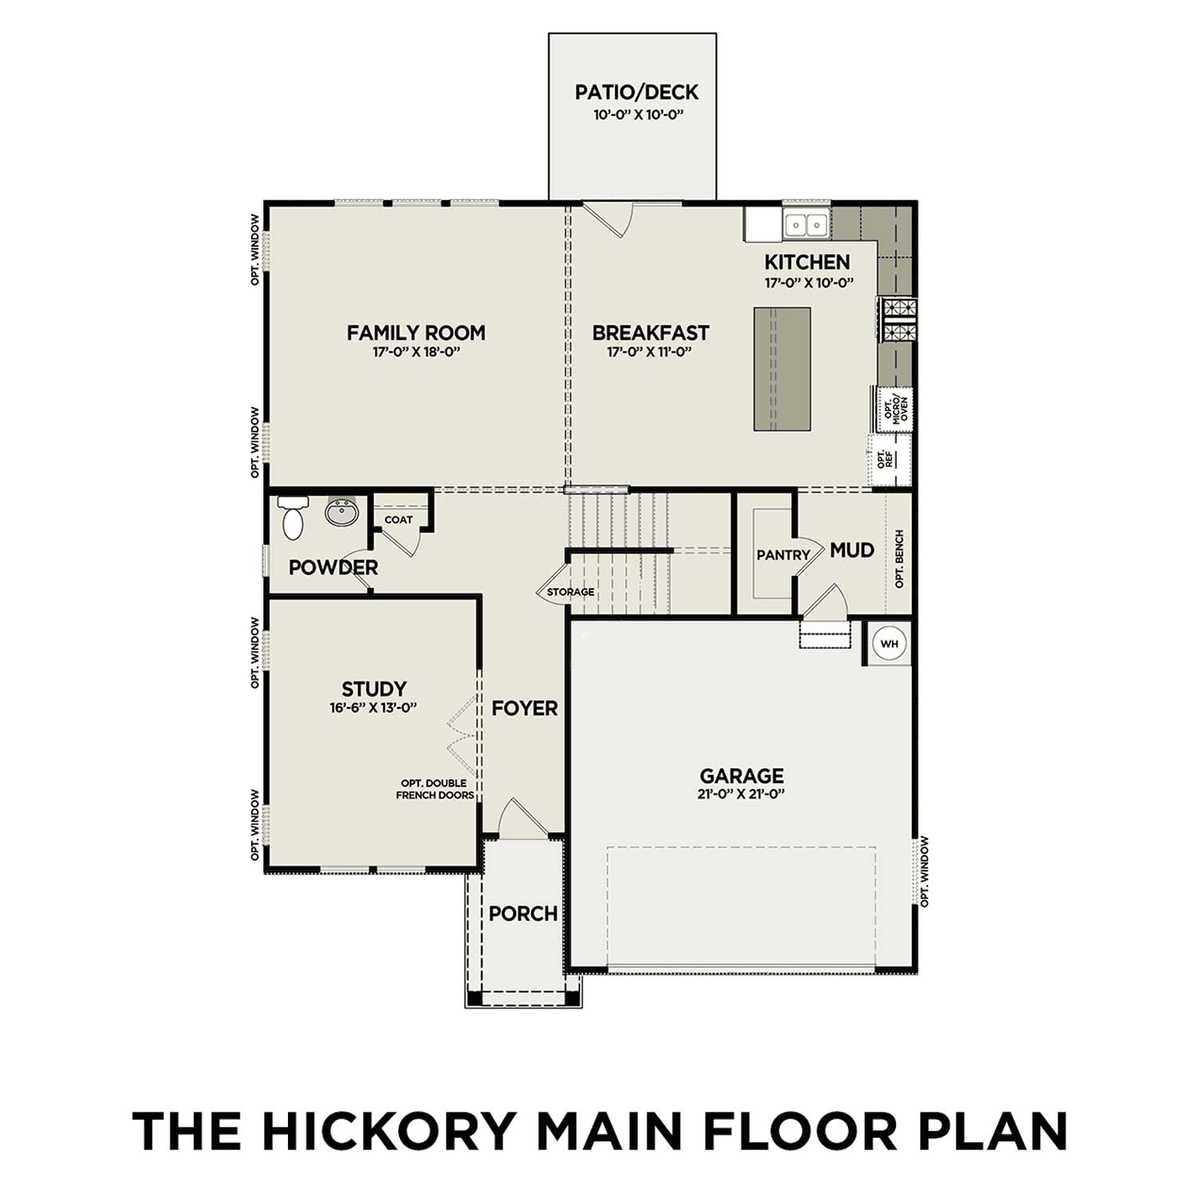 1 - The Hickory C floor plan layout for 491 Black Walnut Drive in Davidson Homes' Carellton community.